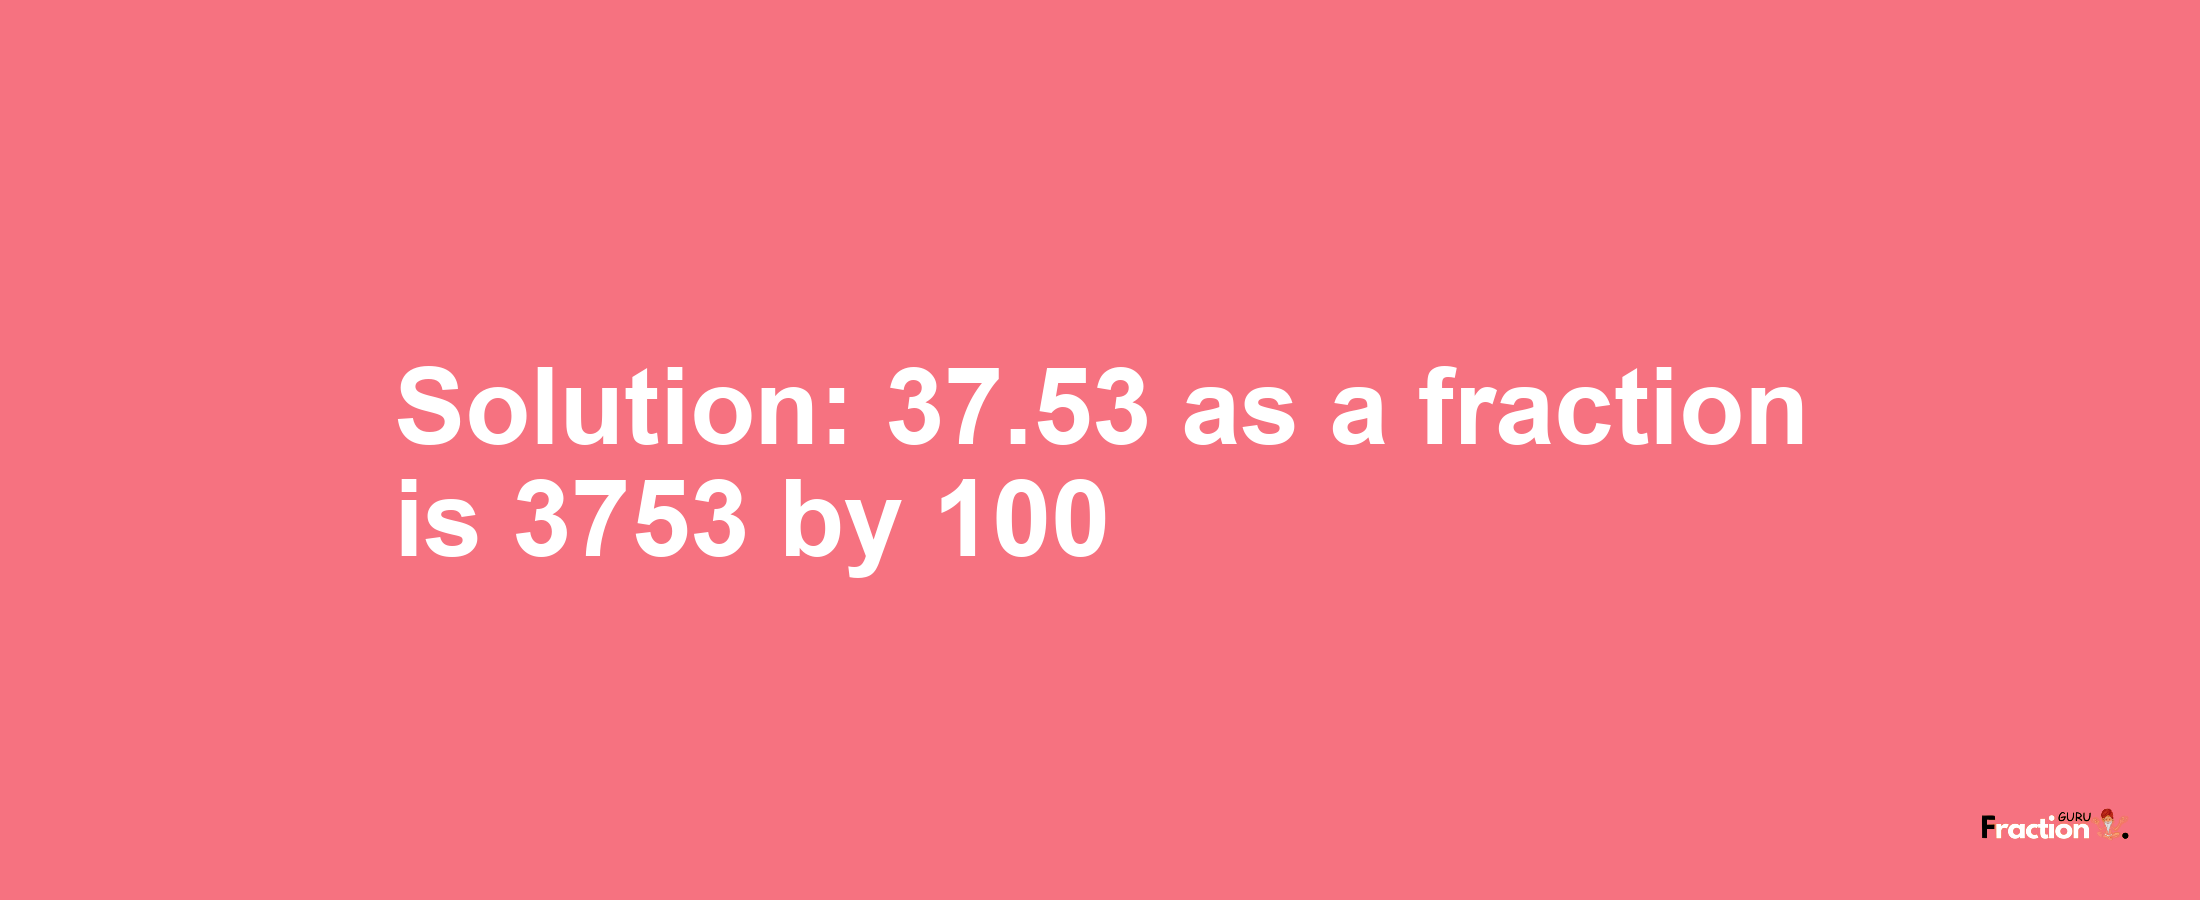 Solution:37.53 as a fraction is 3753/100